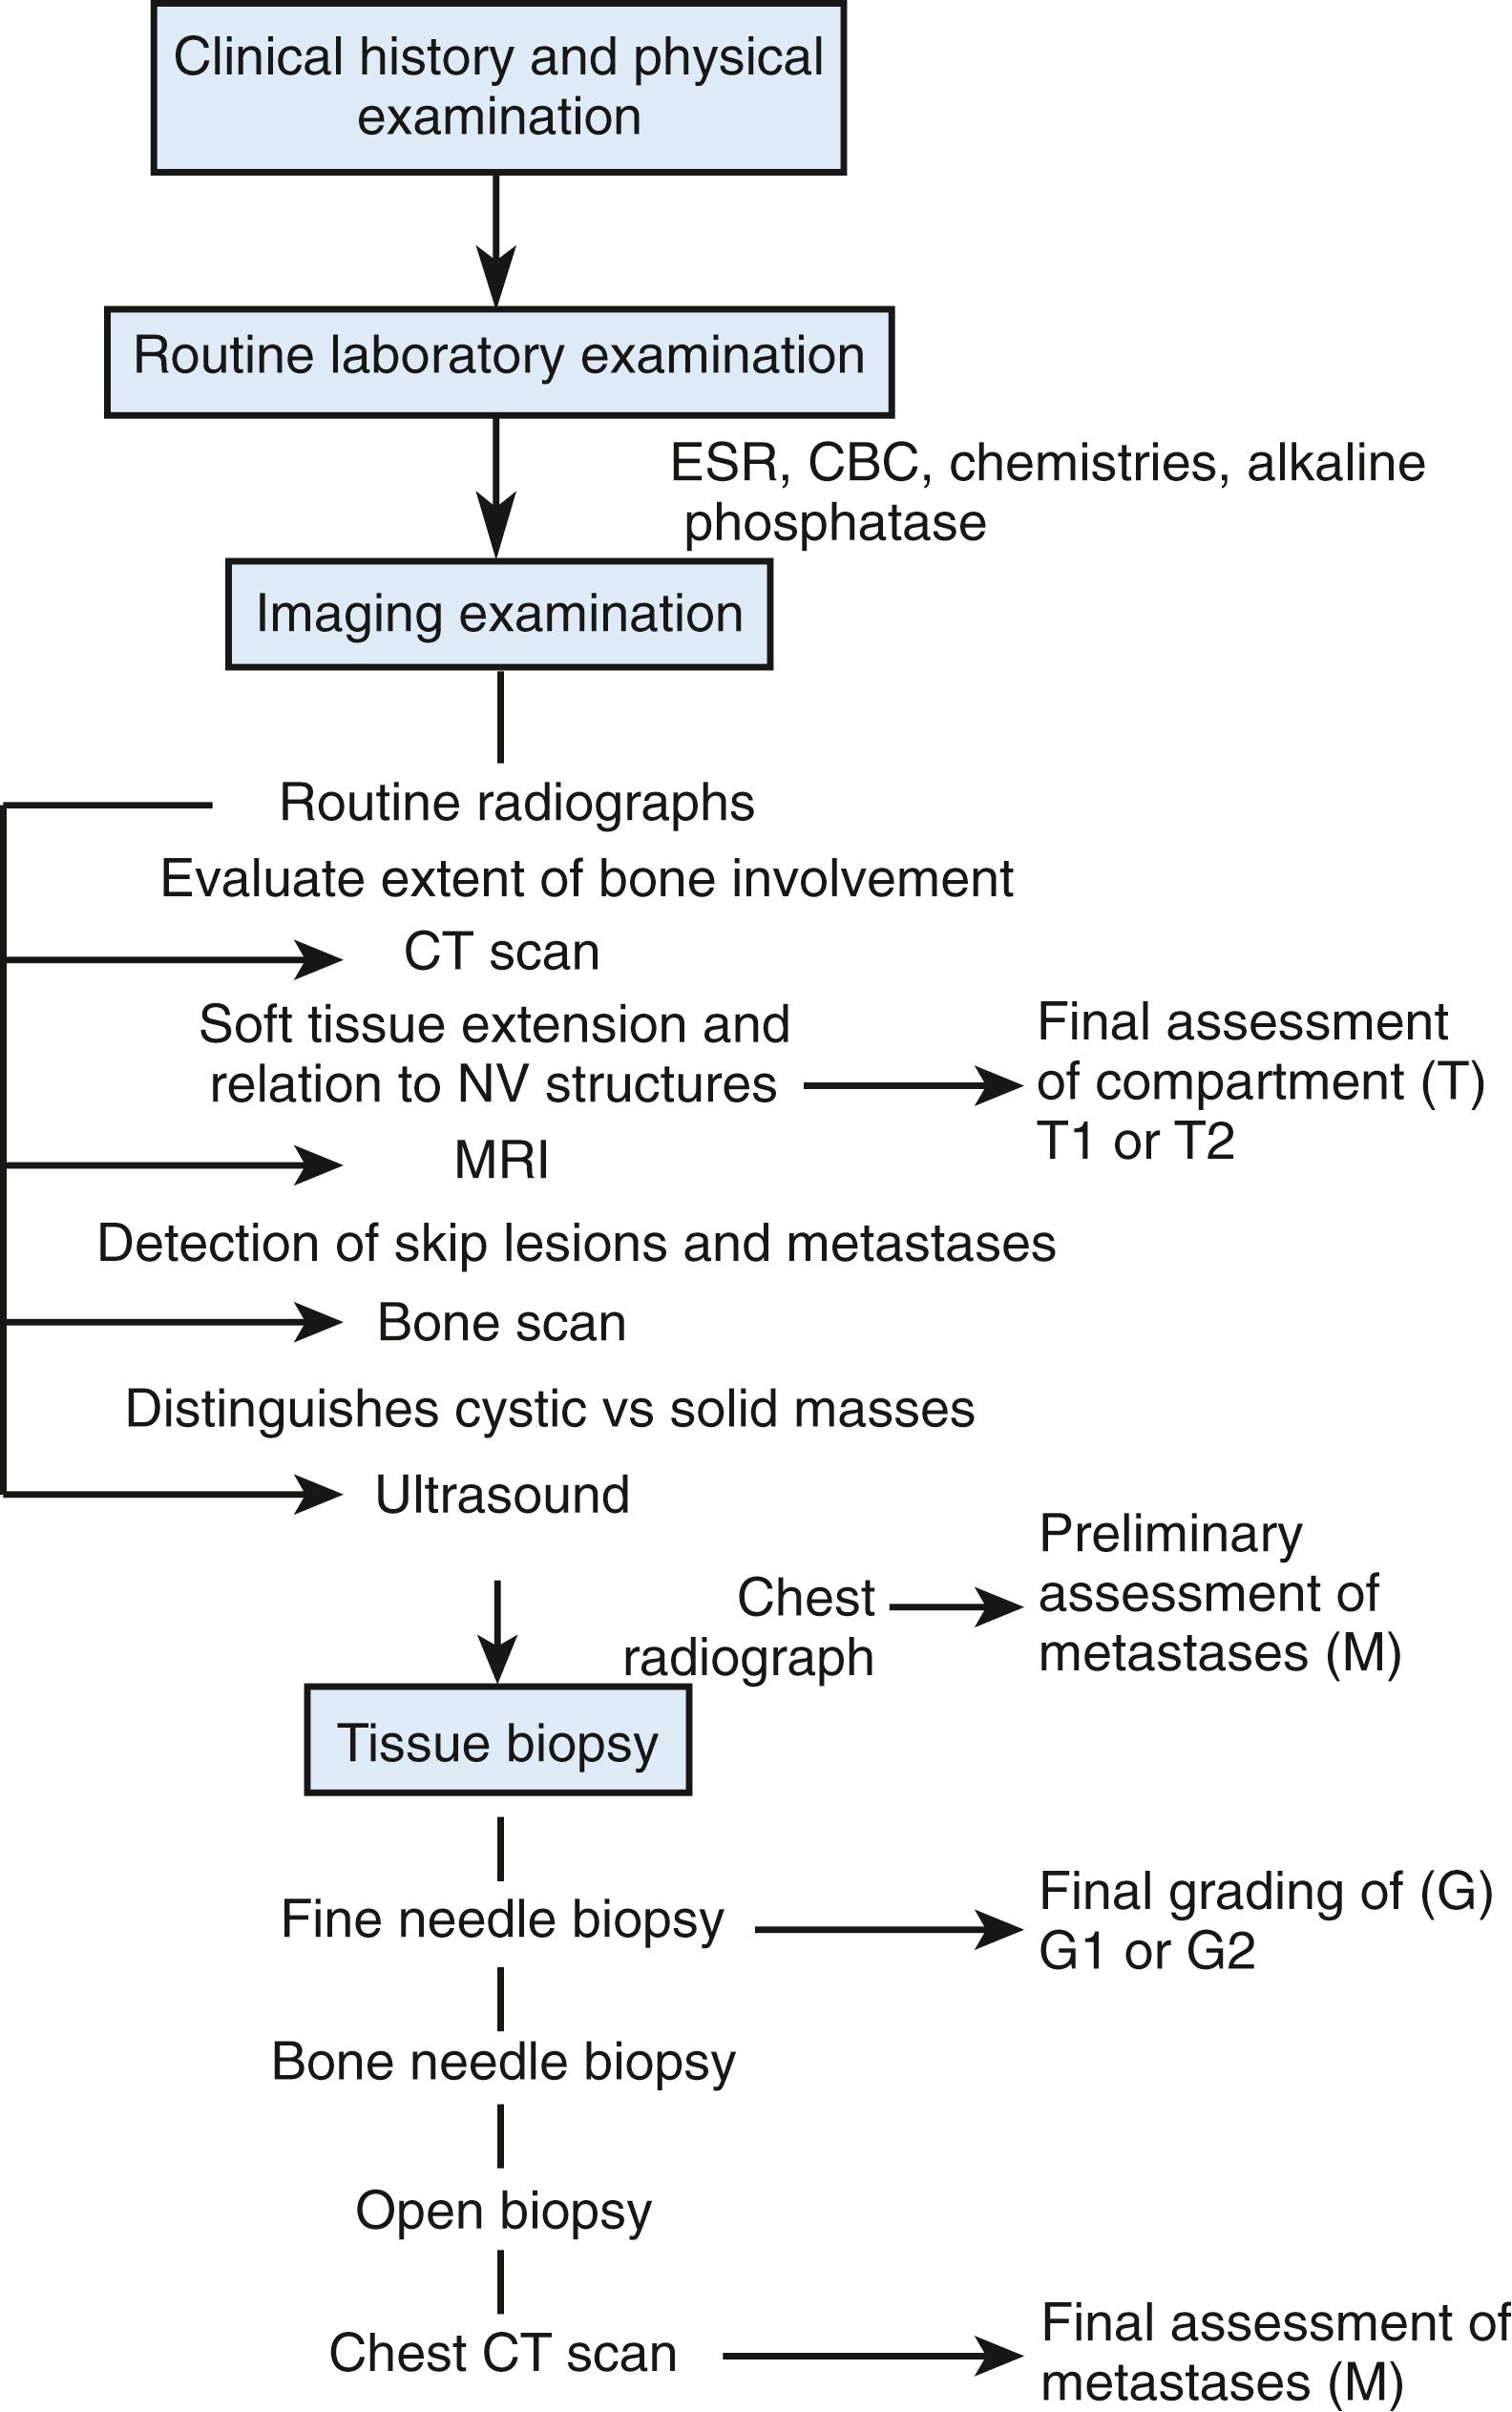 Fig. 59.1, Suggested evaluation protocol for suspected musculoskeletal neoplasms. CBC, Complete blood count; CT, computed tomography; ESR, erythrocyte sedimentation rate; MRI, magnetic resonance imaging; NV, neurovascular.